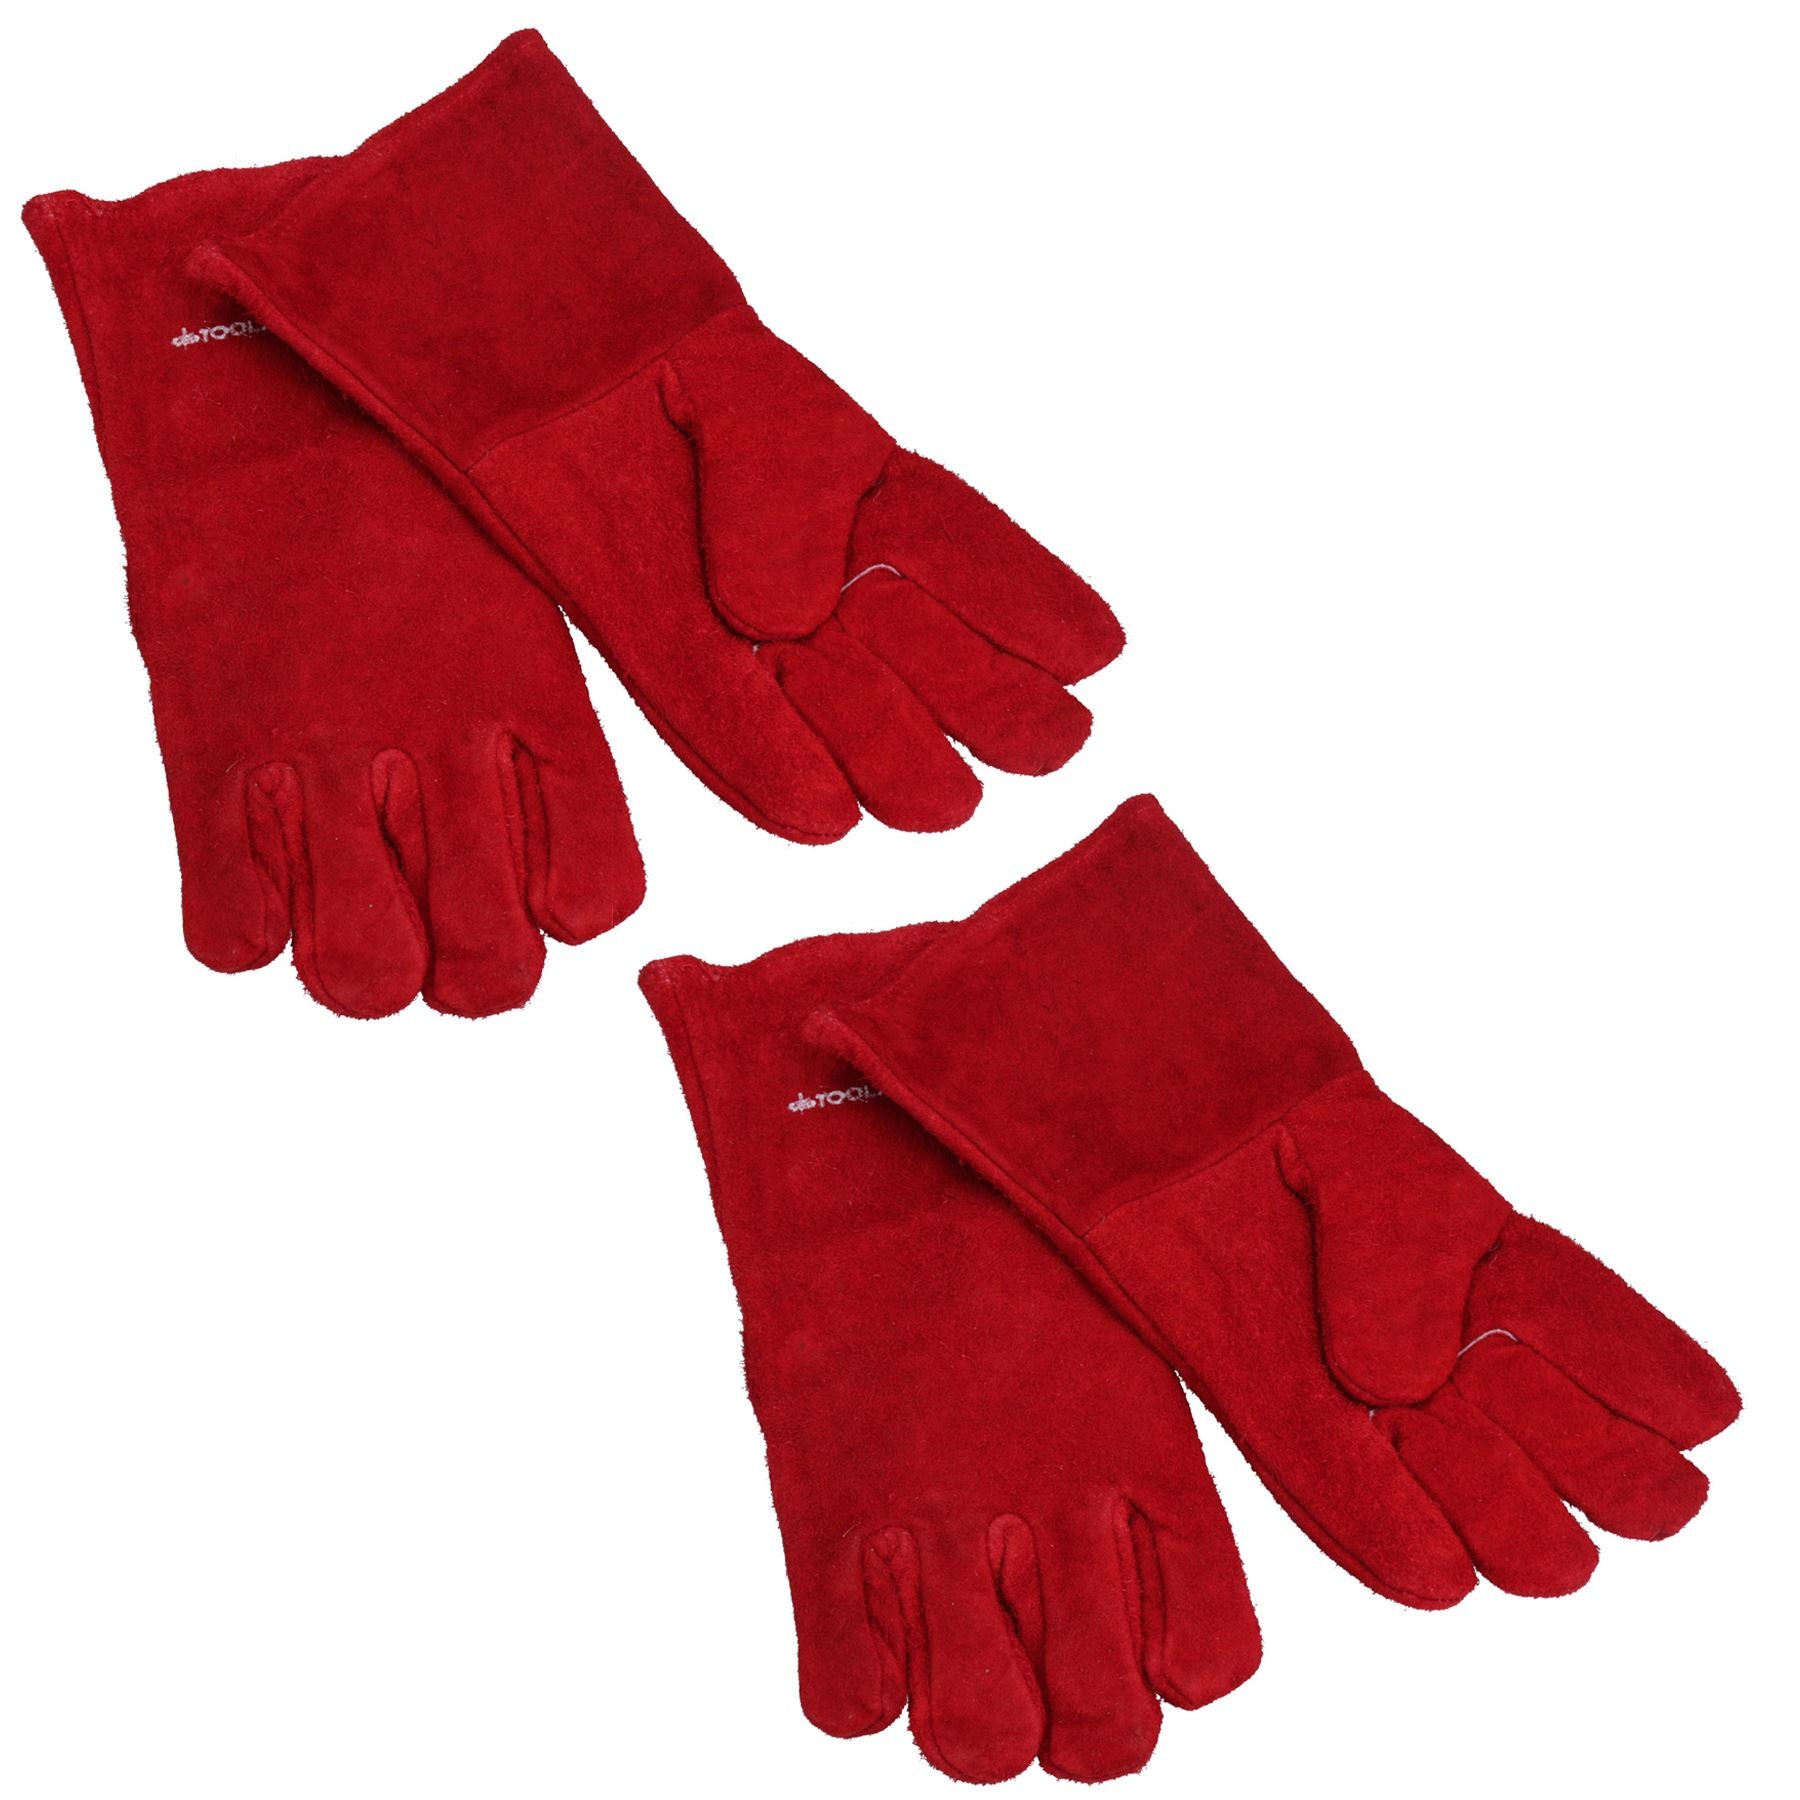 Safety Protection Welding Gardening Gloves Suede Gauntlets Two Pairs TE454